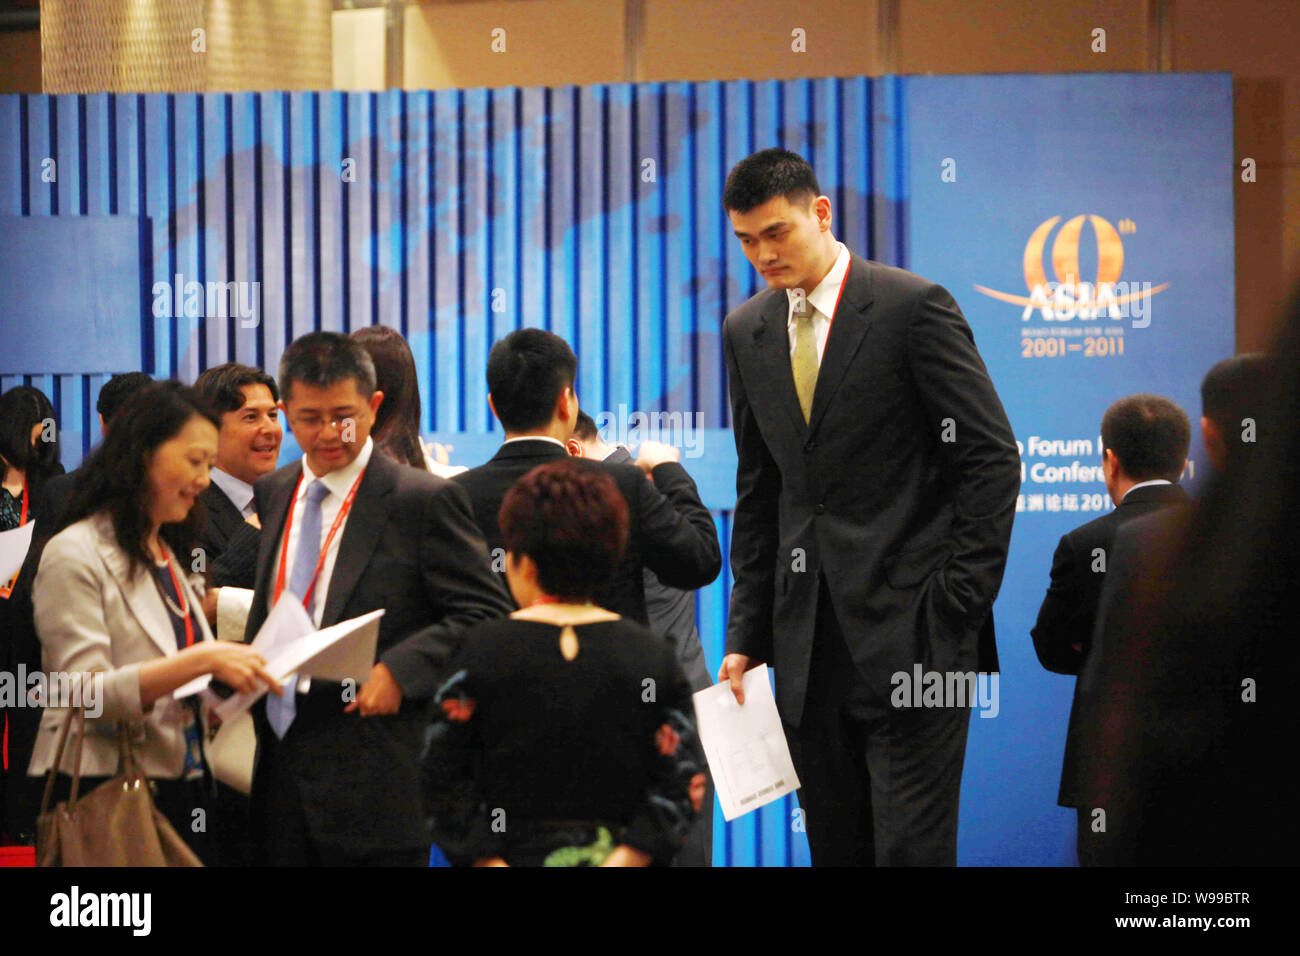 Chinese basketball superstar Yao Ming is pictured during a meeting of the 2011 Boao Forum for Asia Annual Conference in Qionghai city, south Chinas Ha Stock Photo